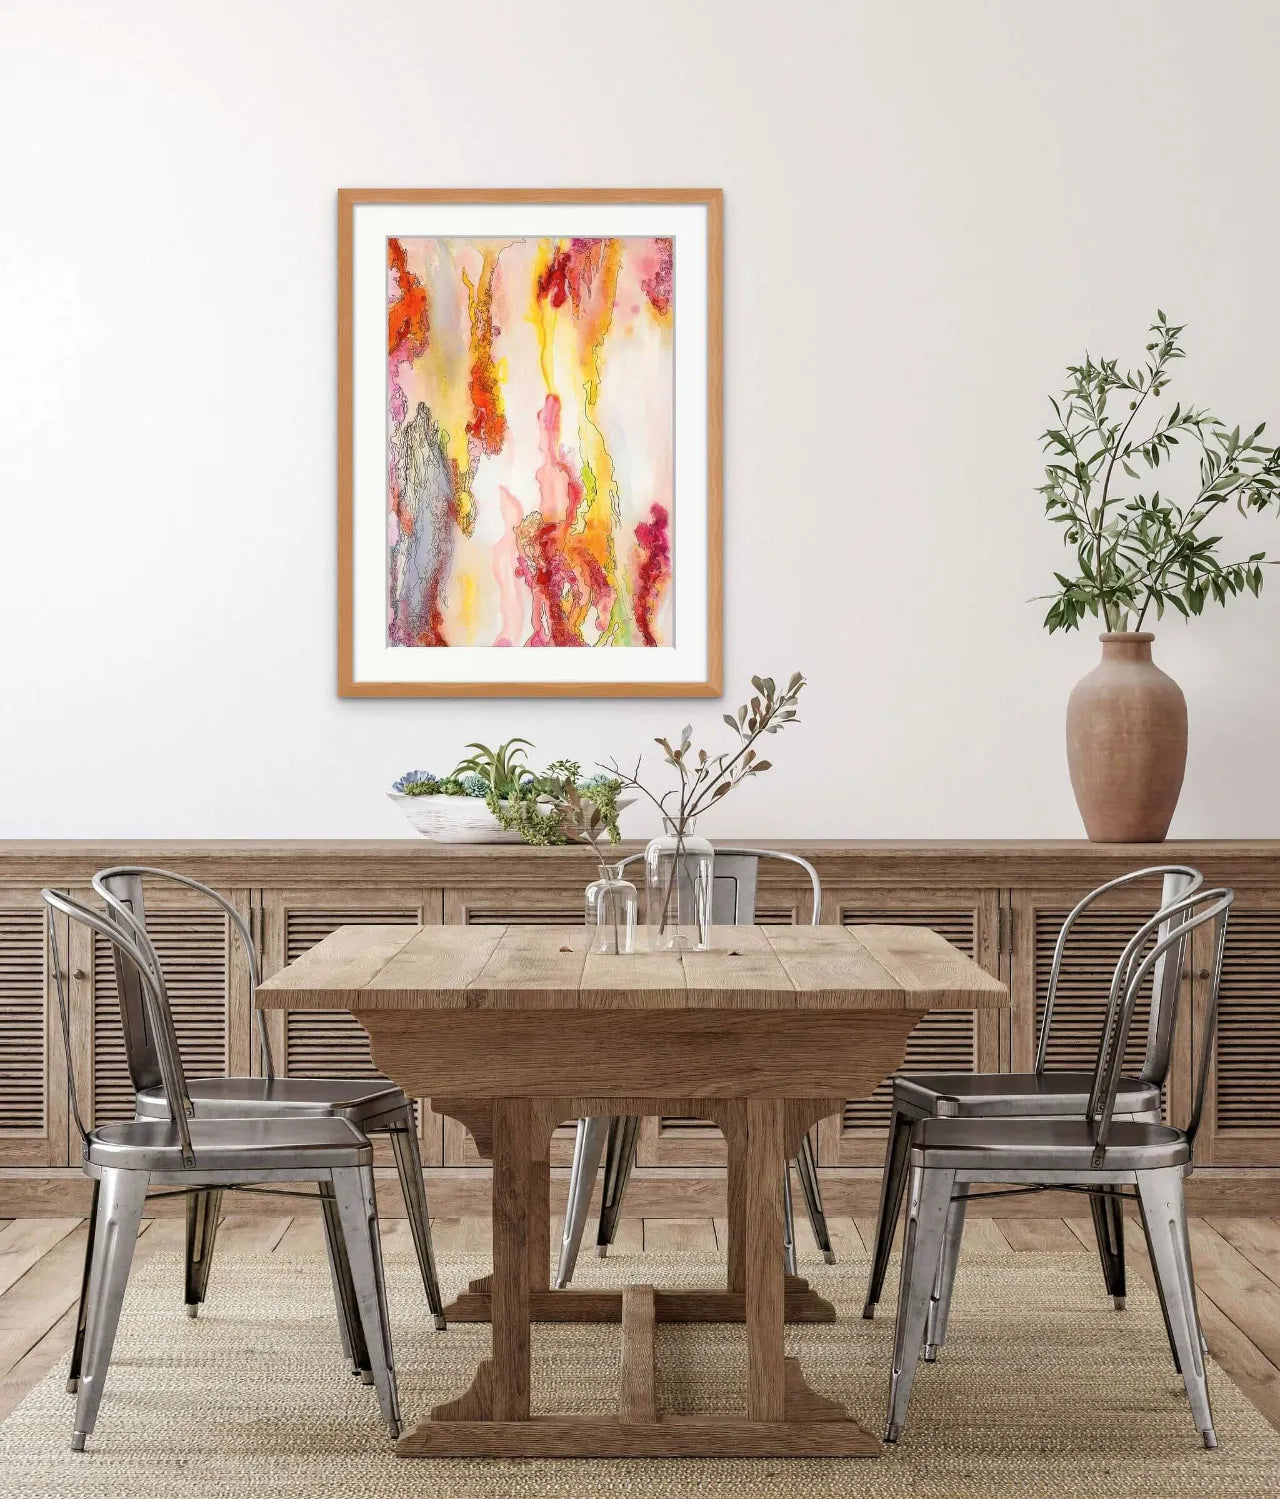 Abstract-Artwork-by-Sung-Lee-Nature-Series-Gum-tree--Dining-Room-Giclee-Limited-Edition-Print-Australia